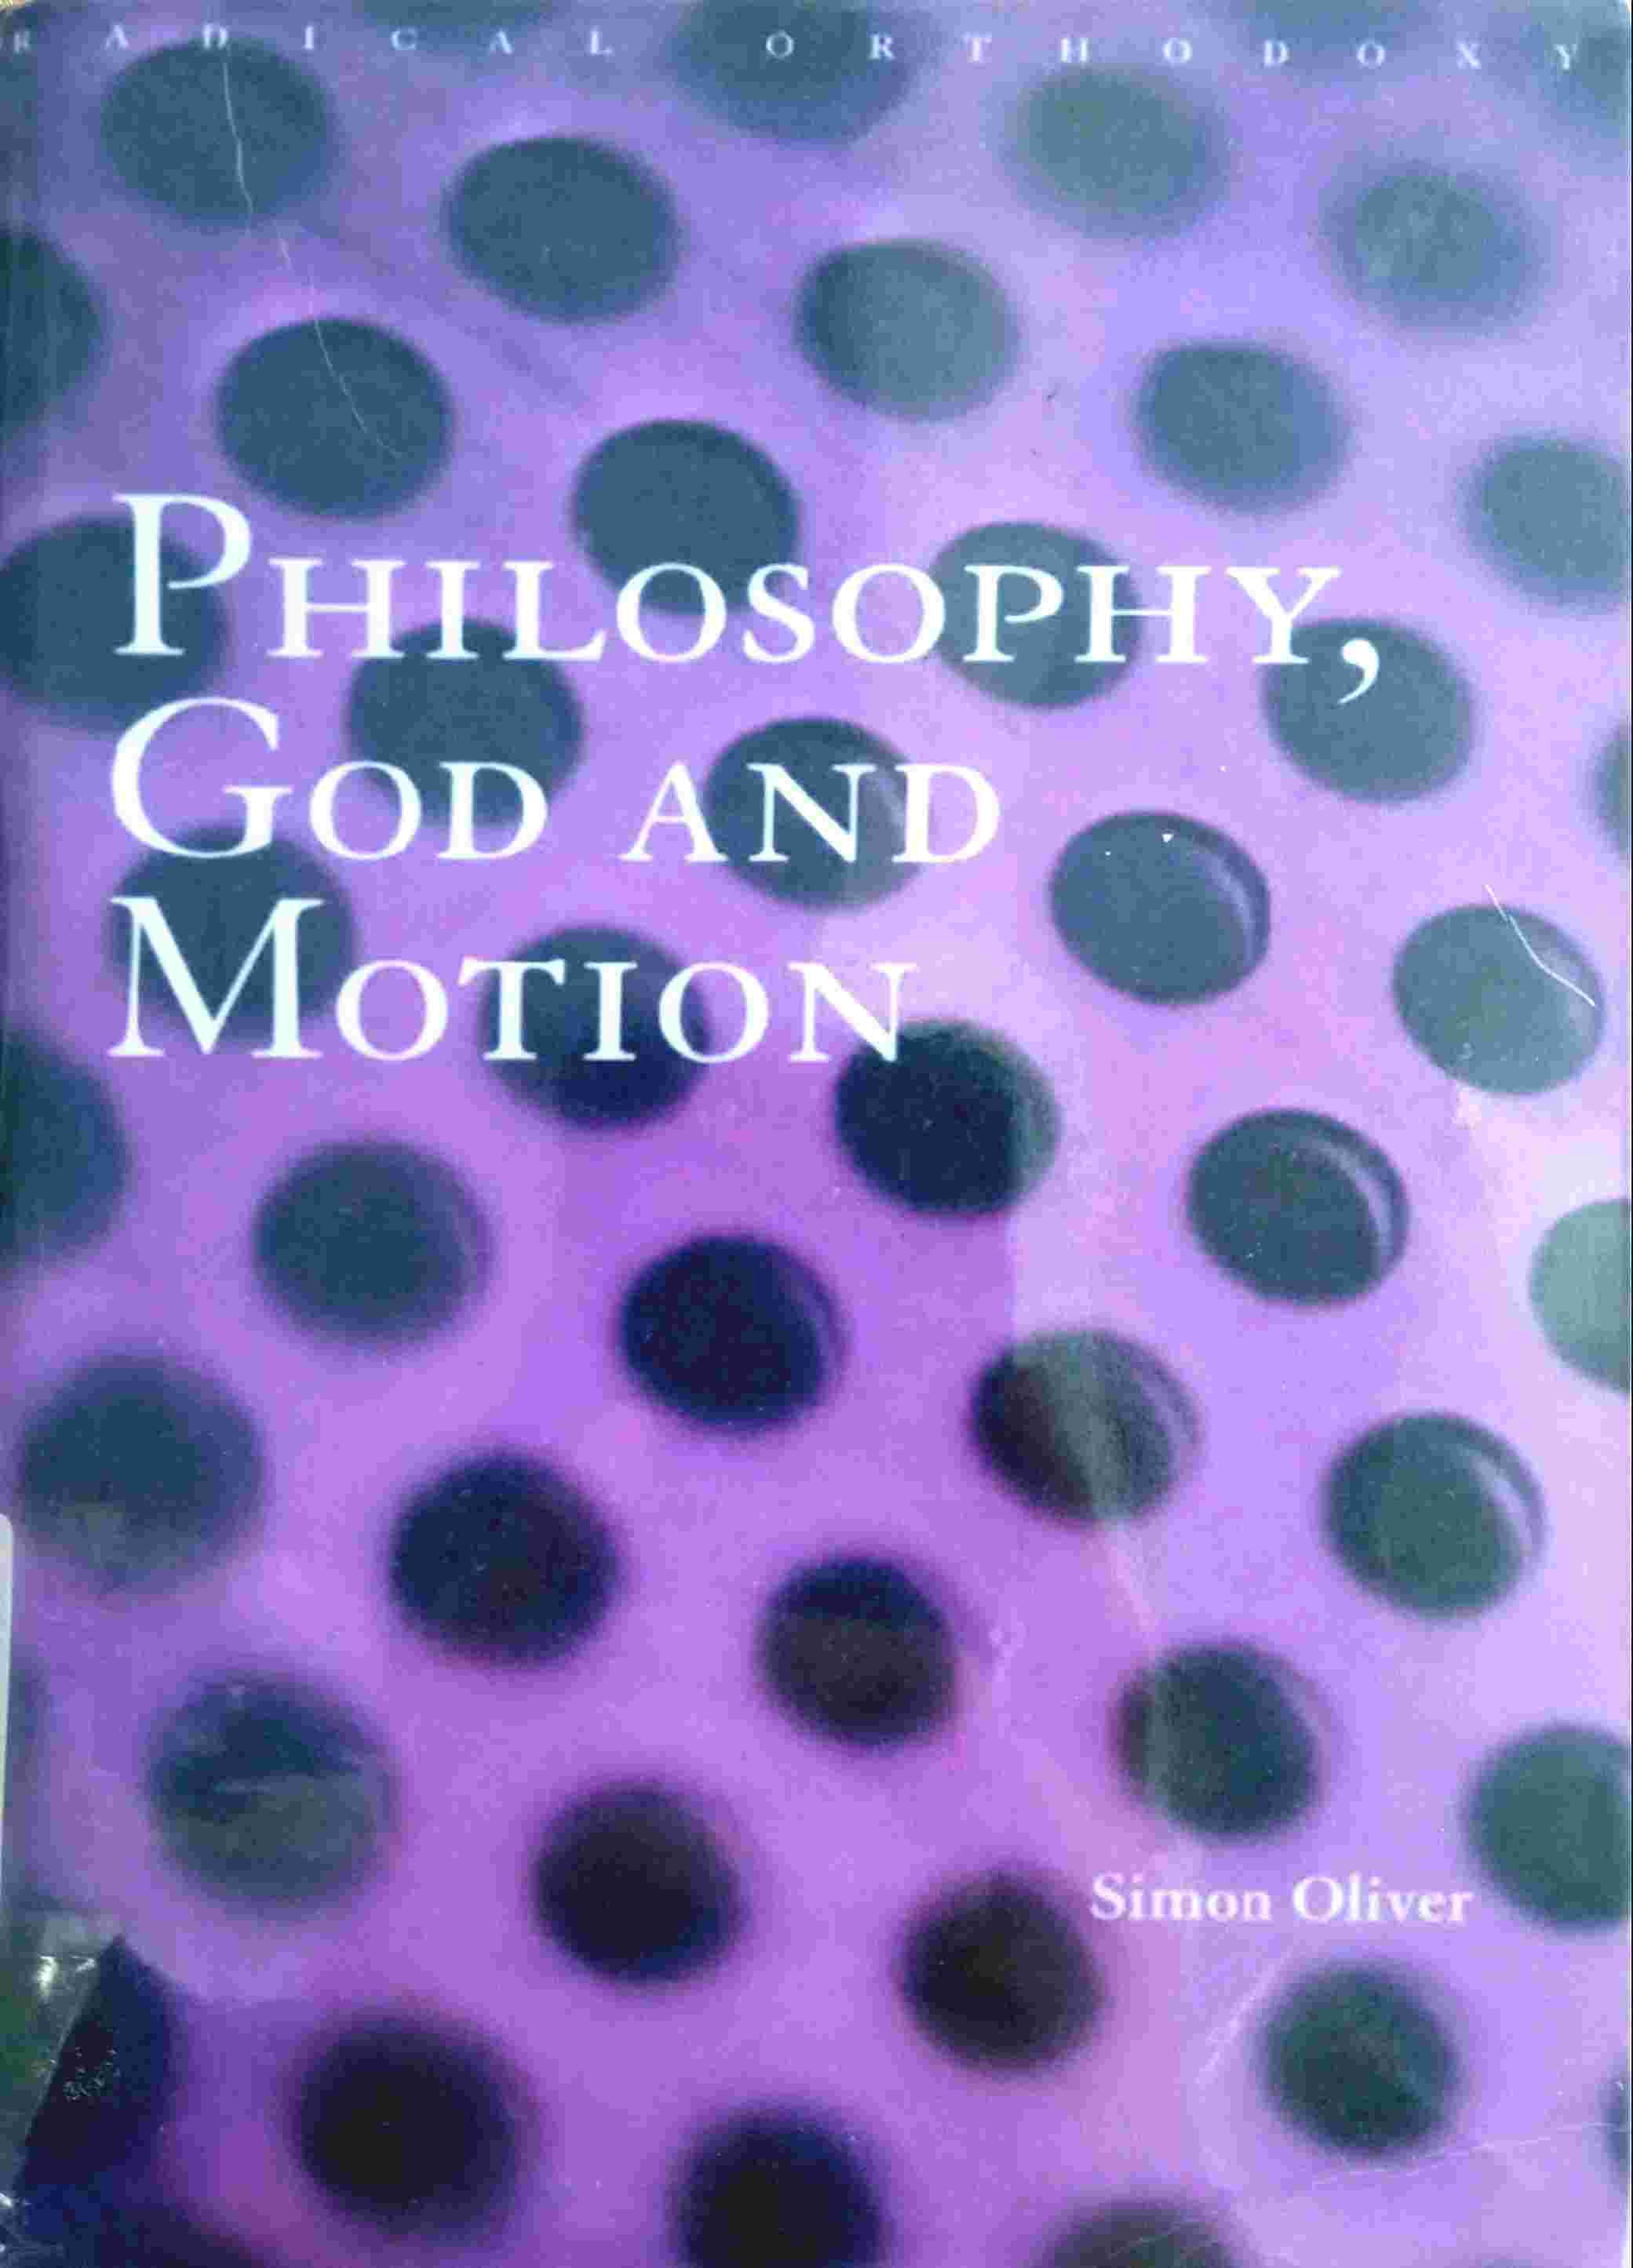 PHILOSOPHY, GOD AND MOTION